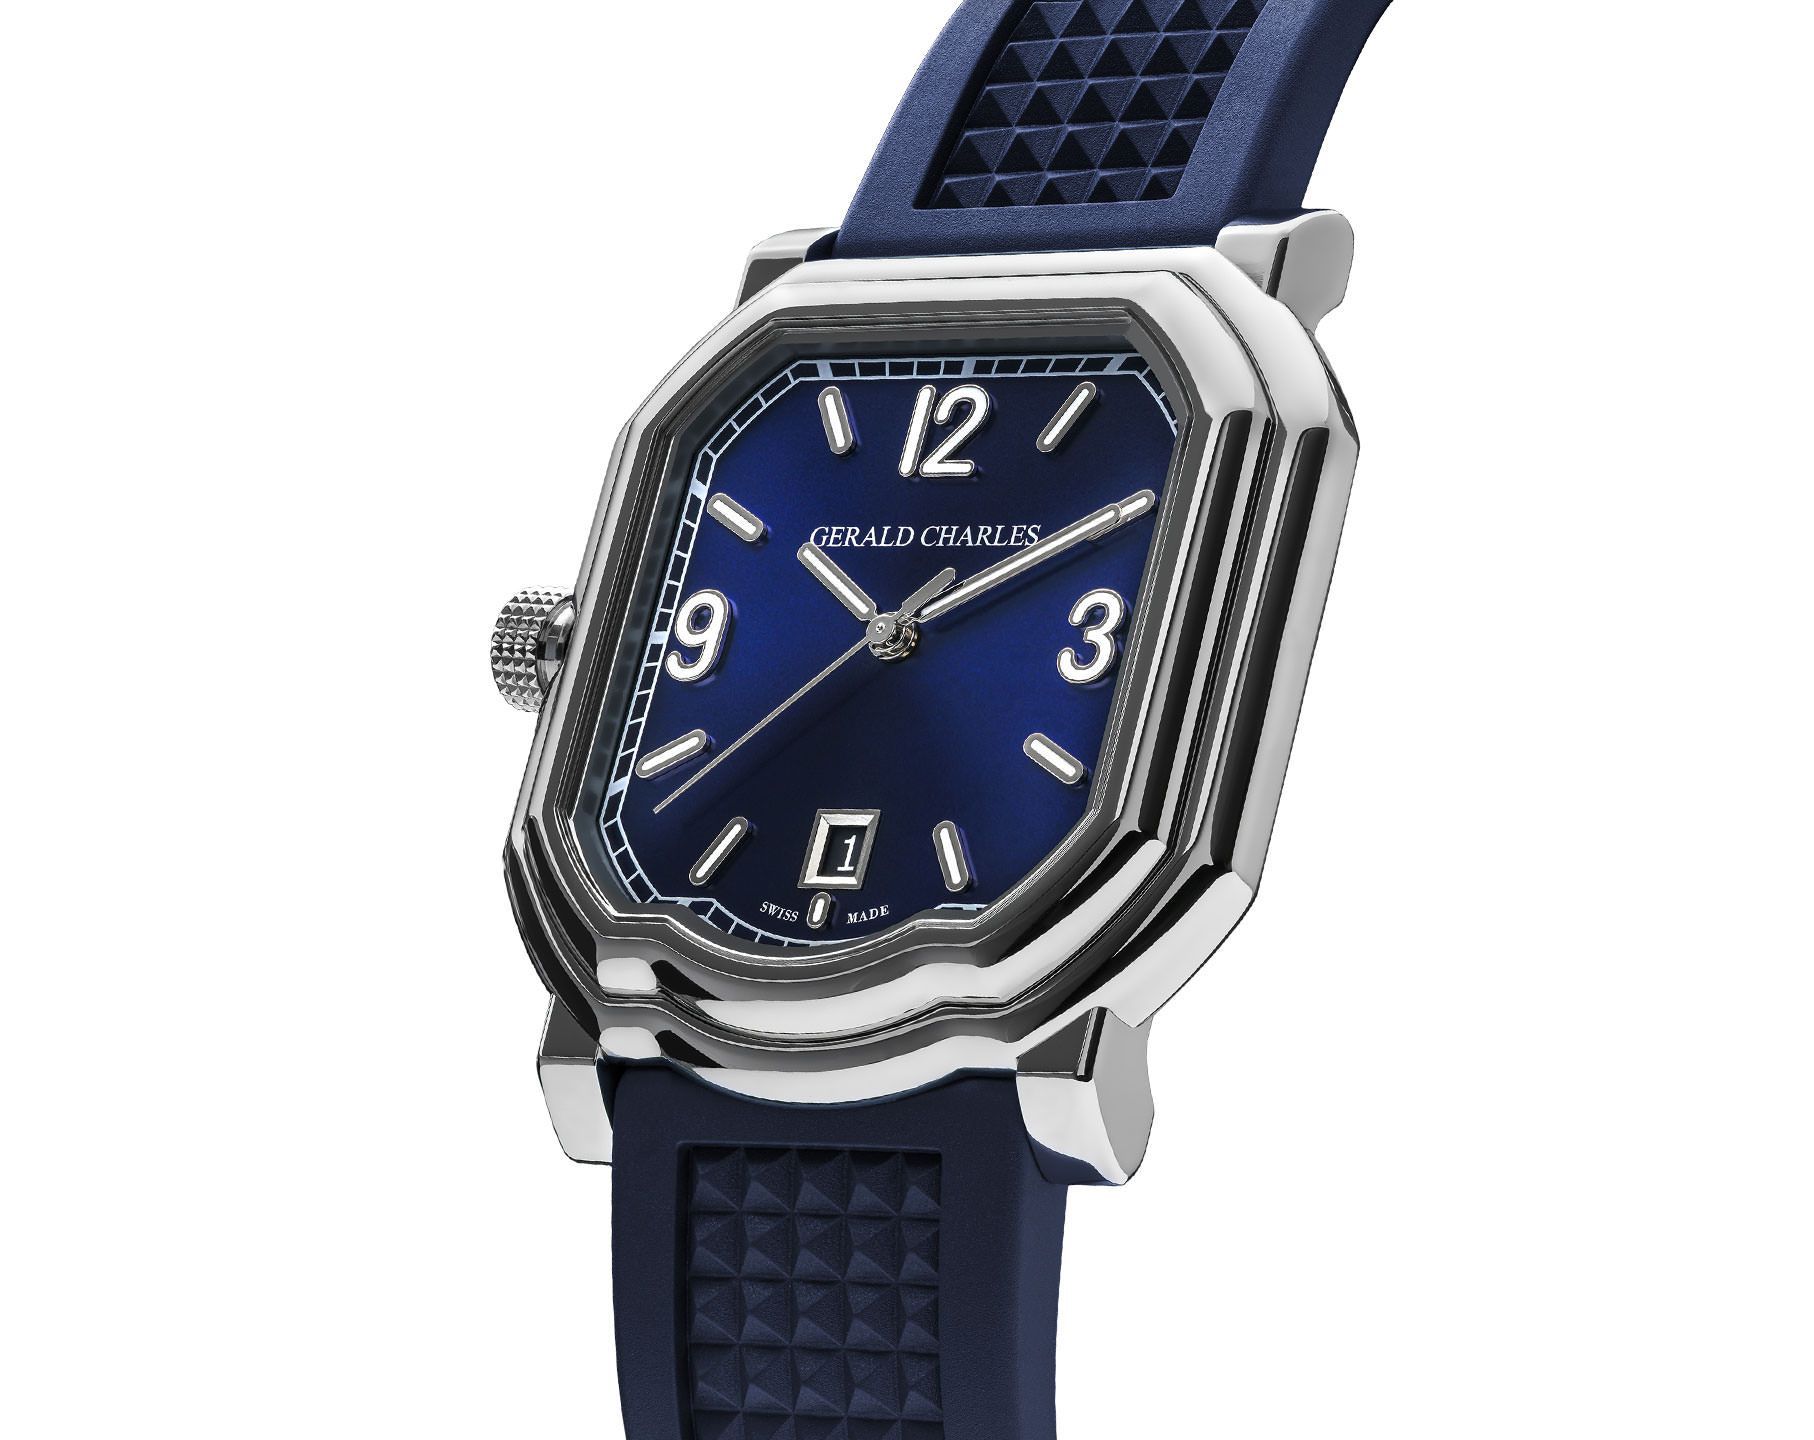 Gerald Charles Maestro GC Sport Blue Dial 41.7 mm Automatic Watch For Unisex - 2